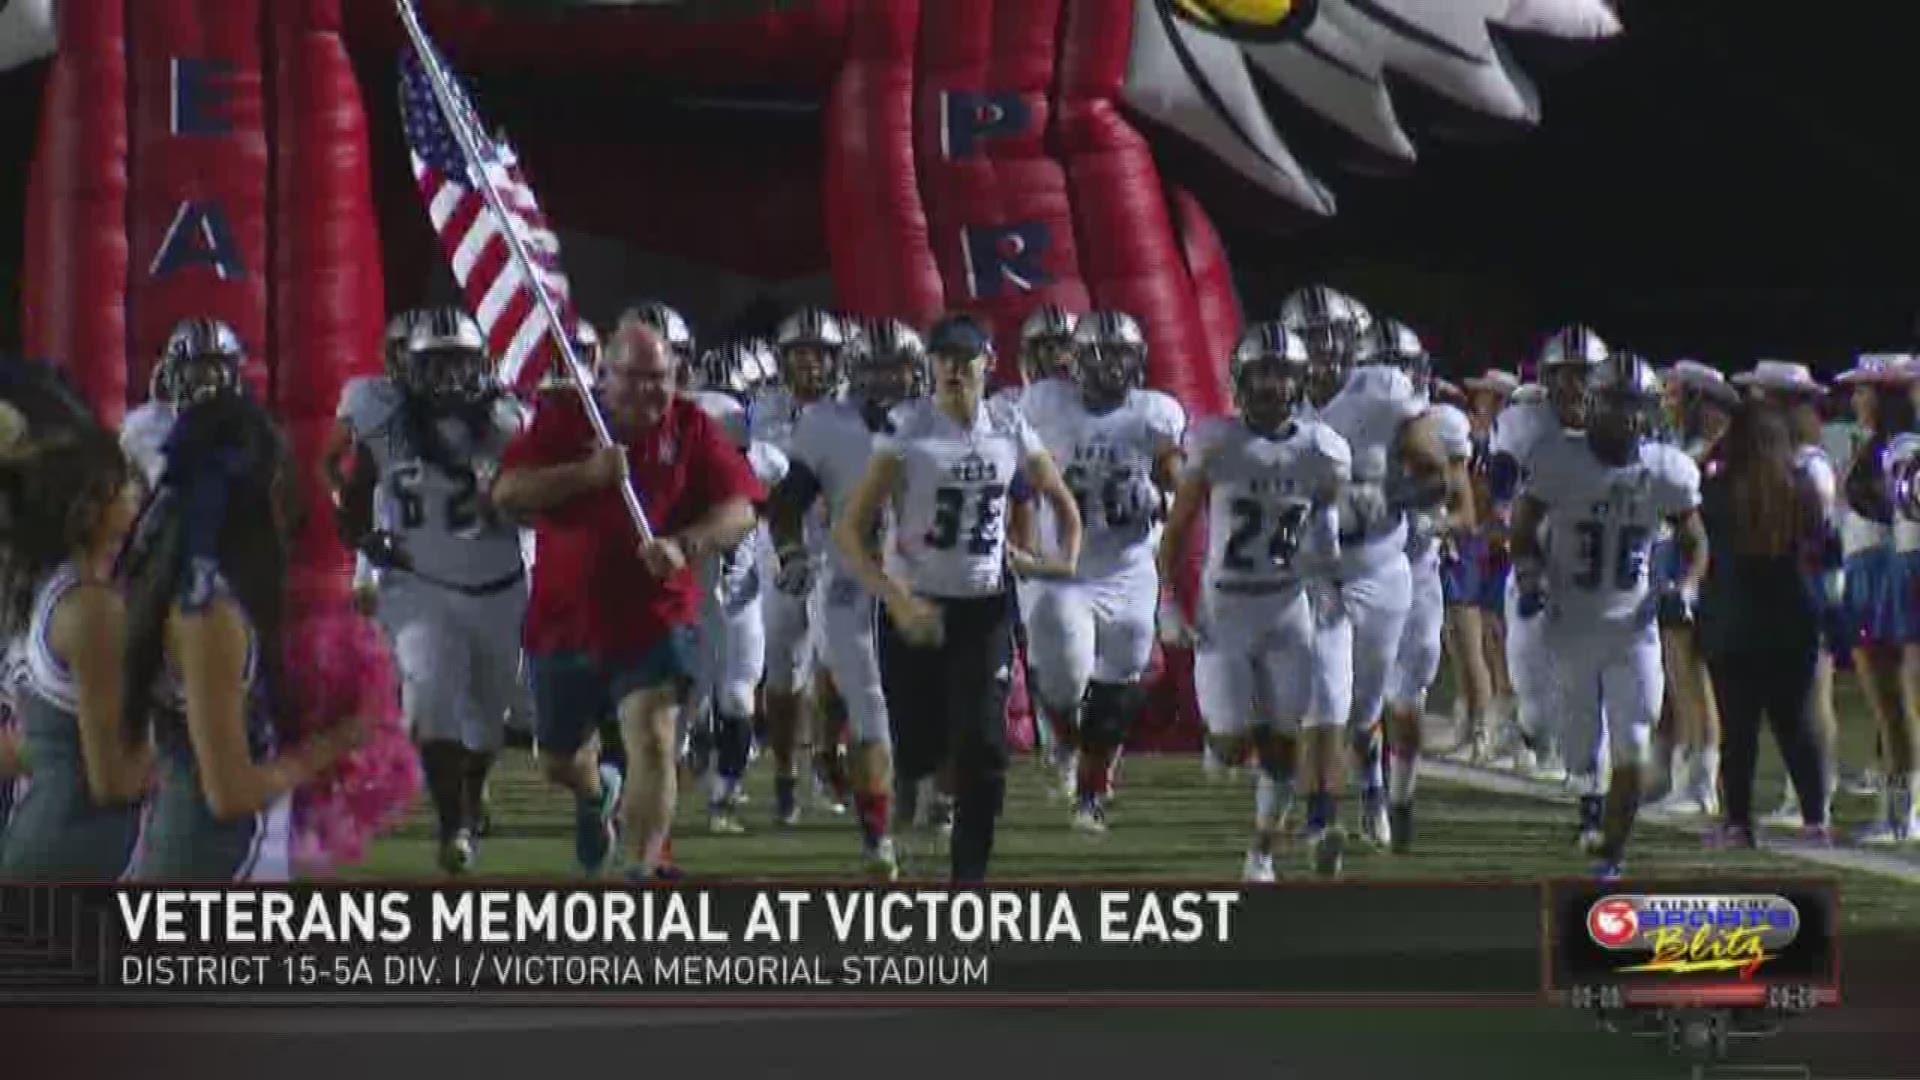 Blitz Week 8 - Part II Includes:
- Veterans Memorial's big win over Victoria East
- Moody's double-overtime win over Ray
- Rockport-Fulton rolling over West Oso
- Or